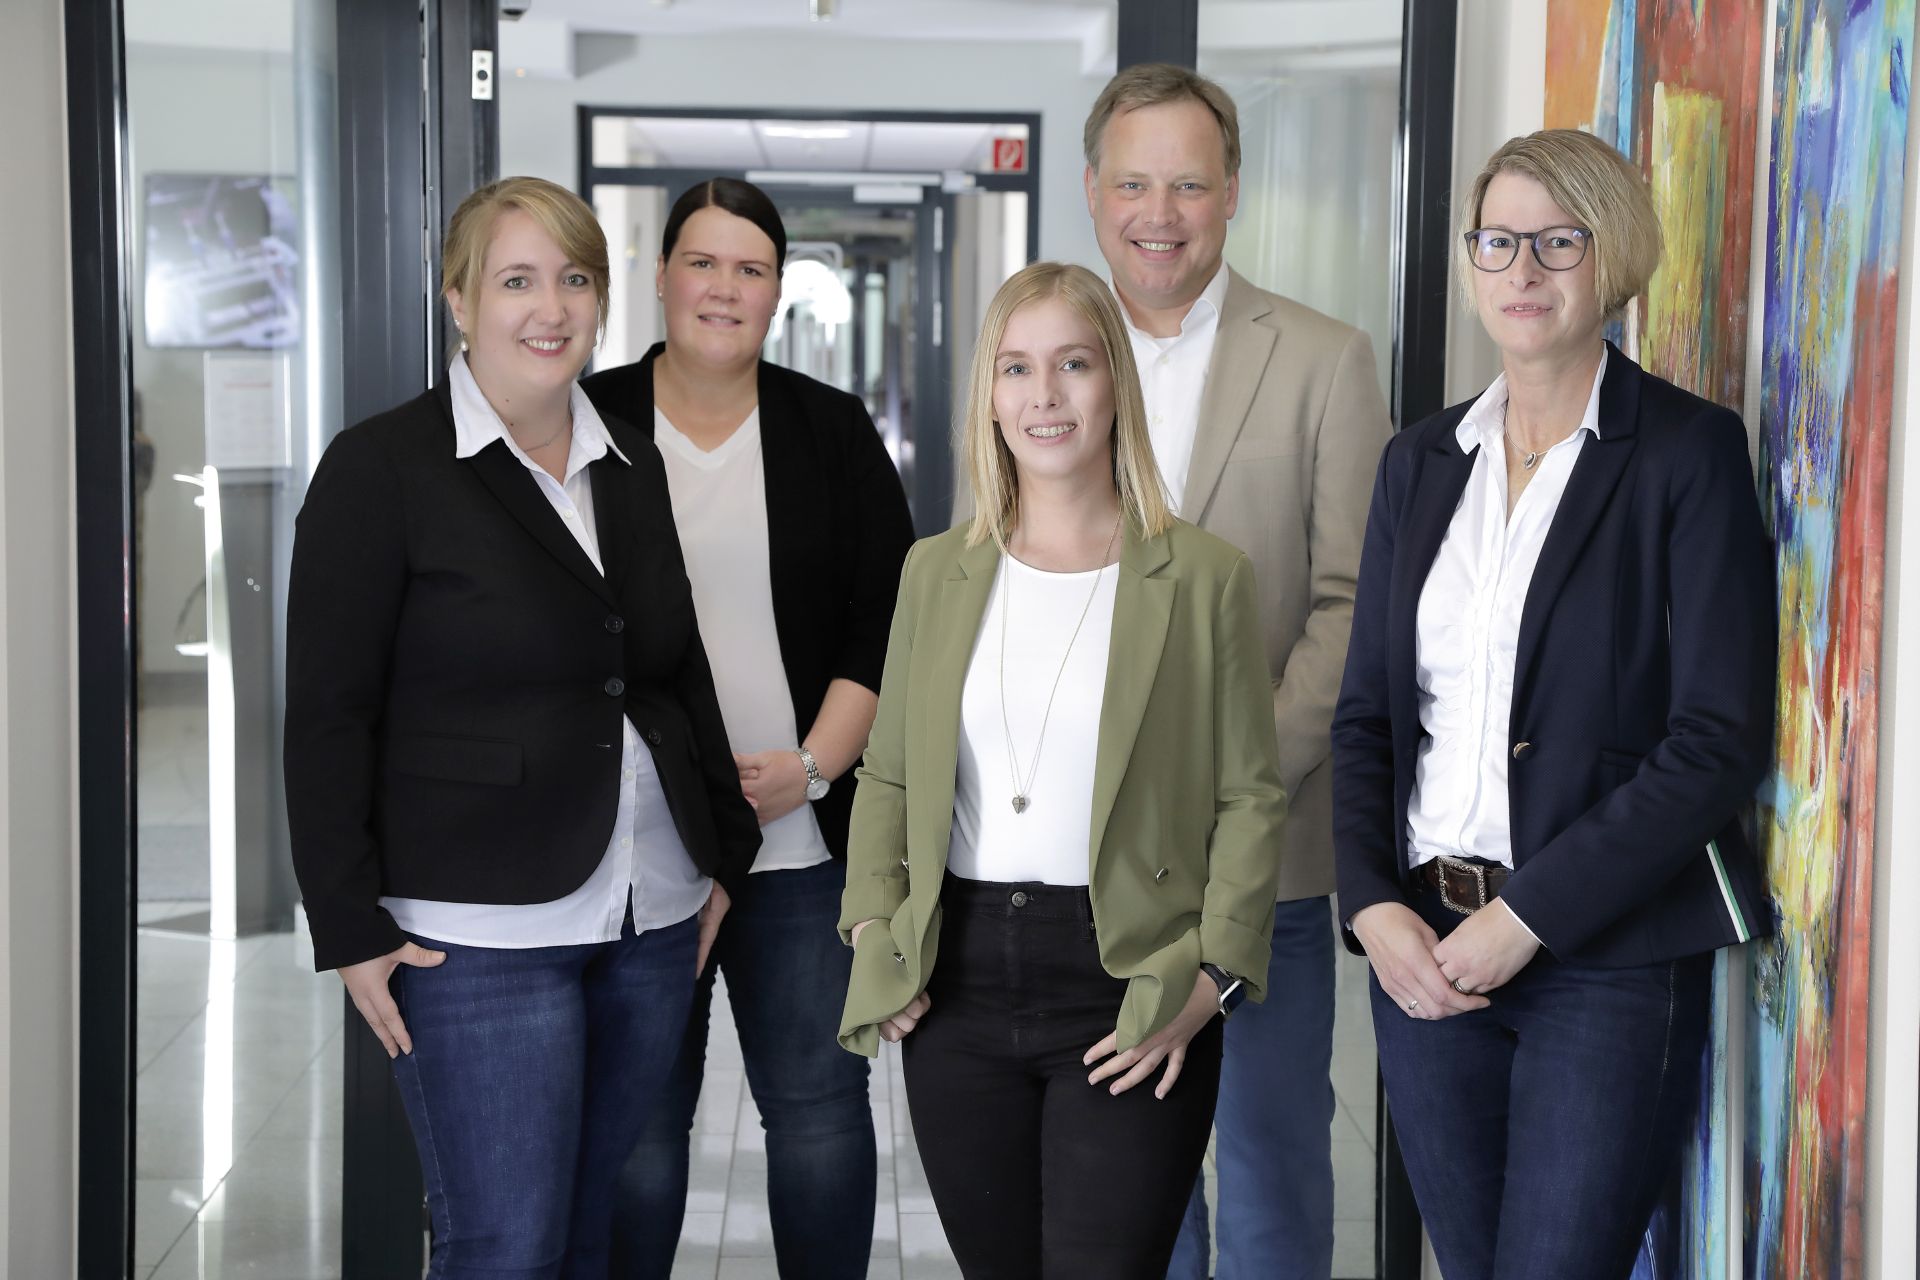 The Human Resources team from left to right: Carina Siewering, Britta Ostermann, Christina Schlangen, Stephan Illmer and Anika Baumhöfer